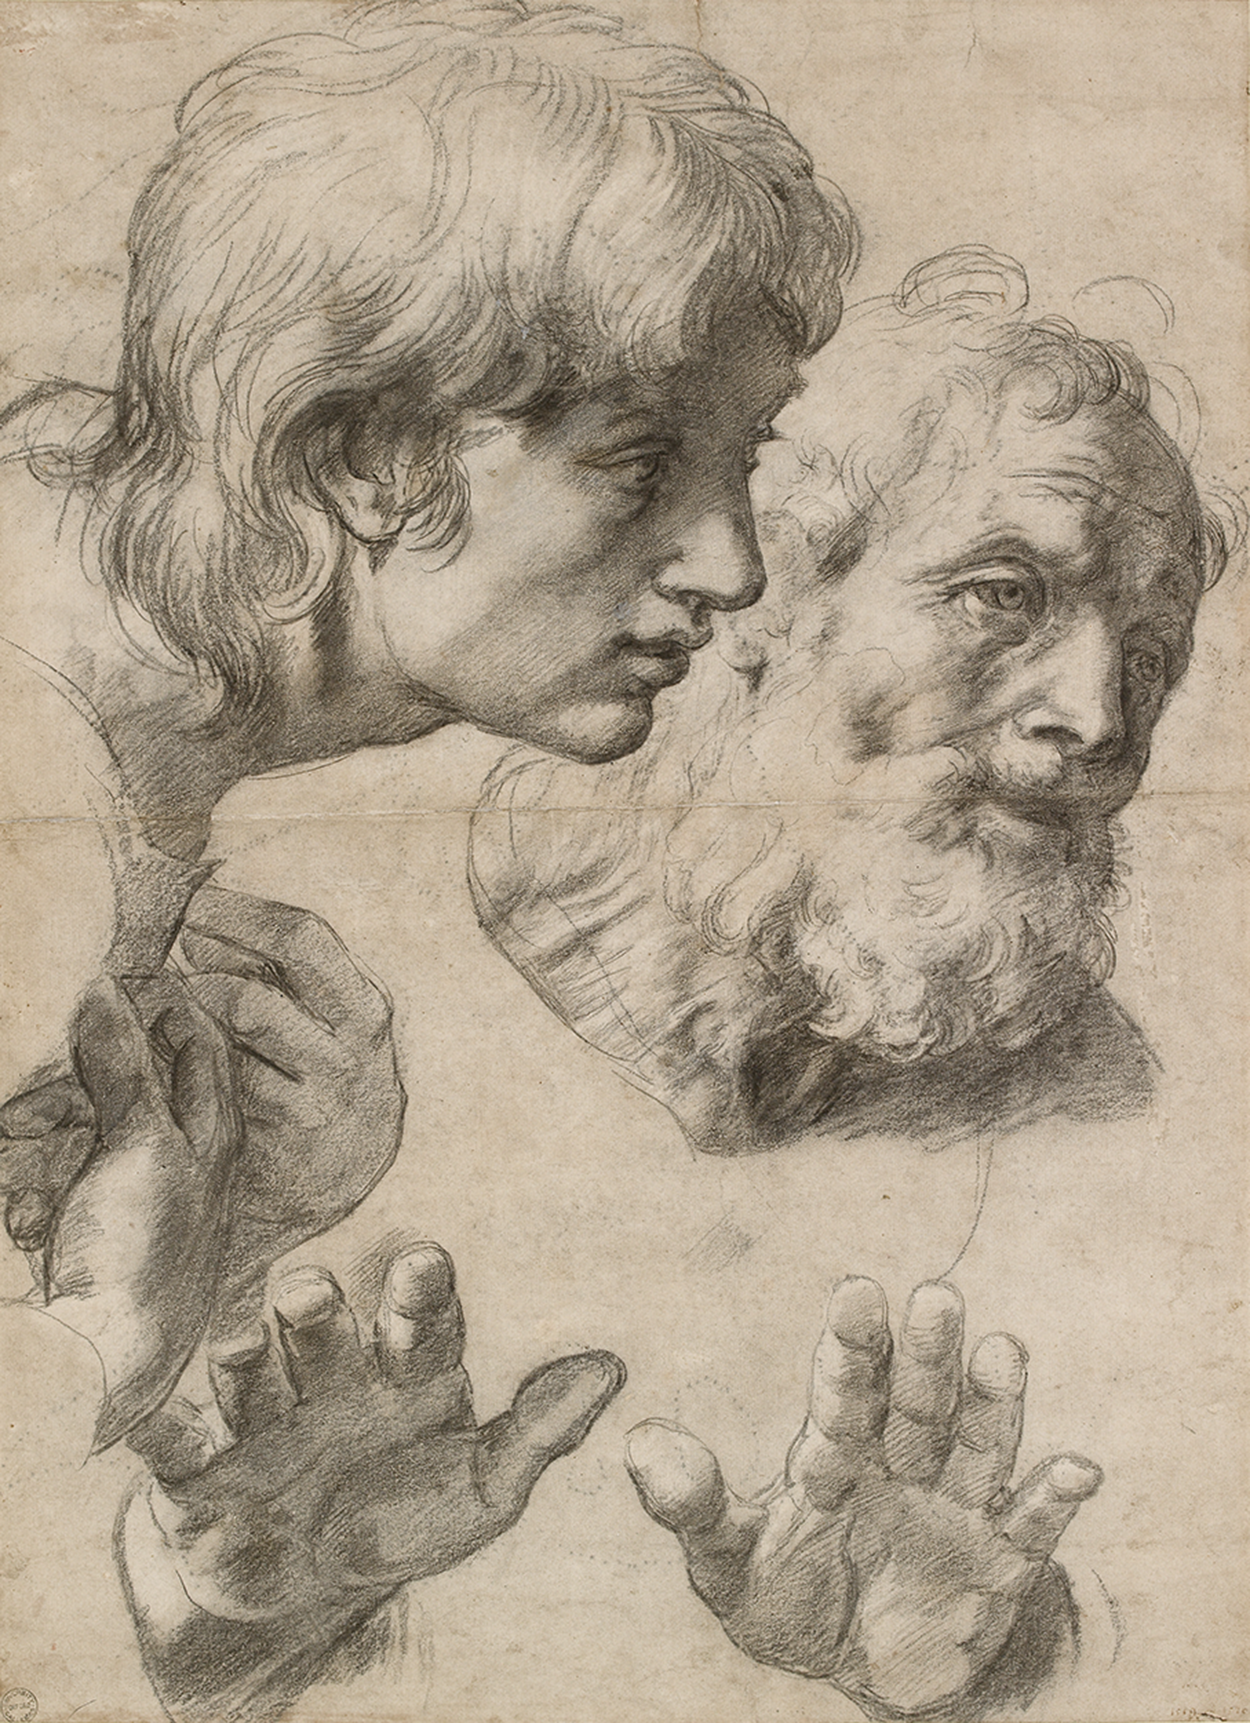 The Heads and Hands of Two Apostles by Raphael Santi - c.1519-20 - 49.9 x 36.4 cm Ashmolean Museum